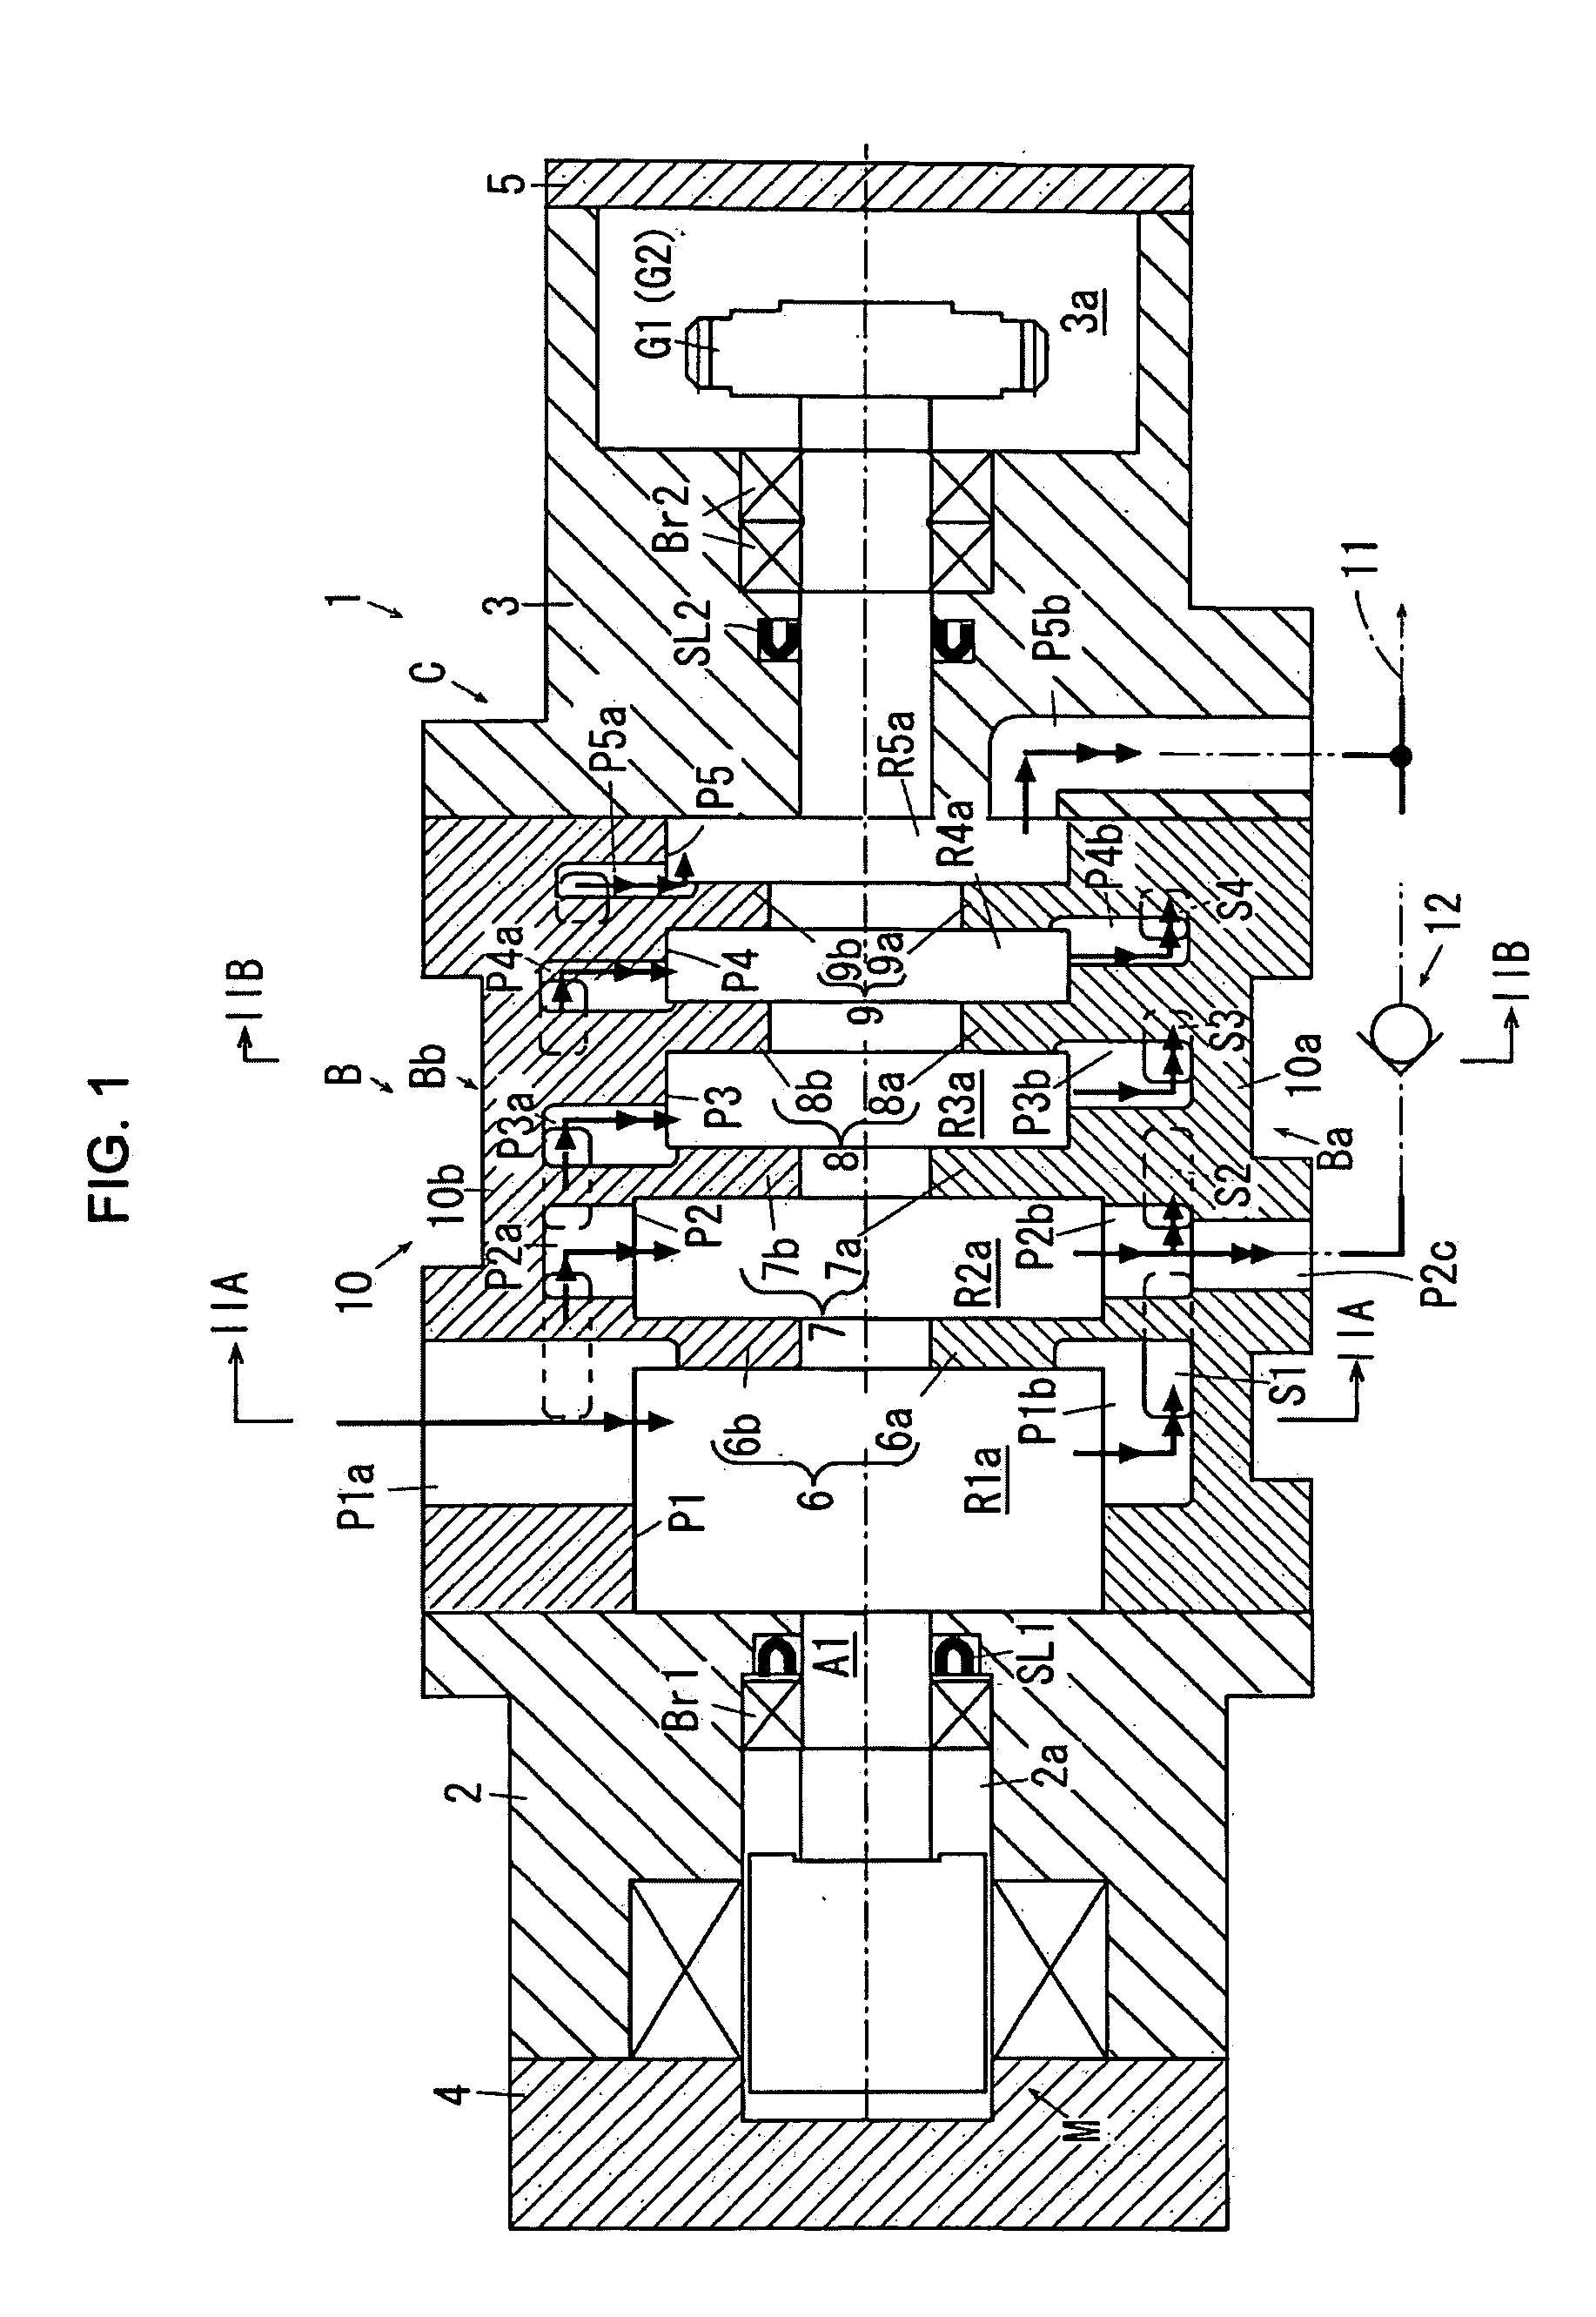 Multistage root type pump